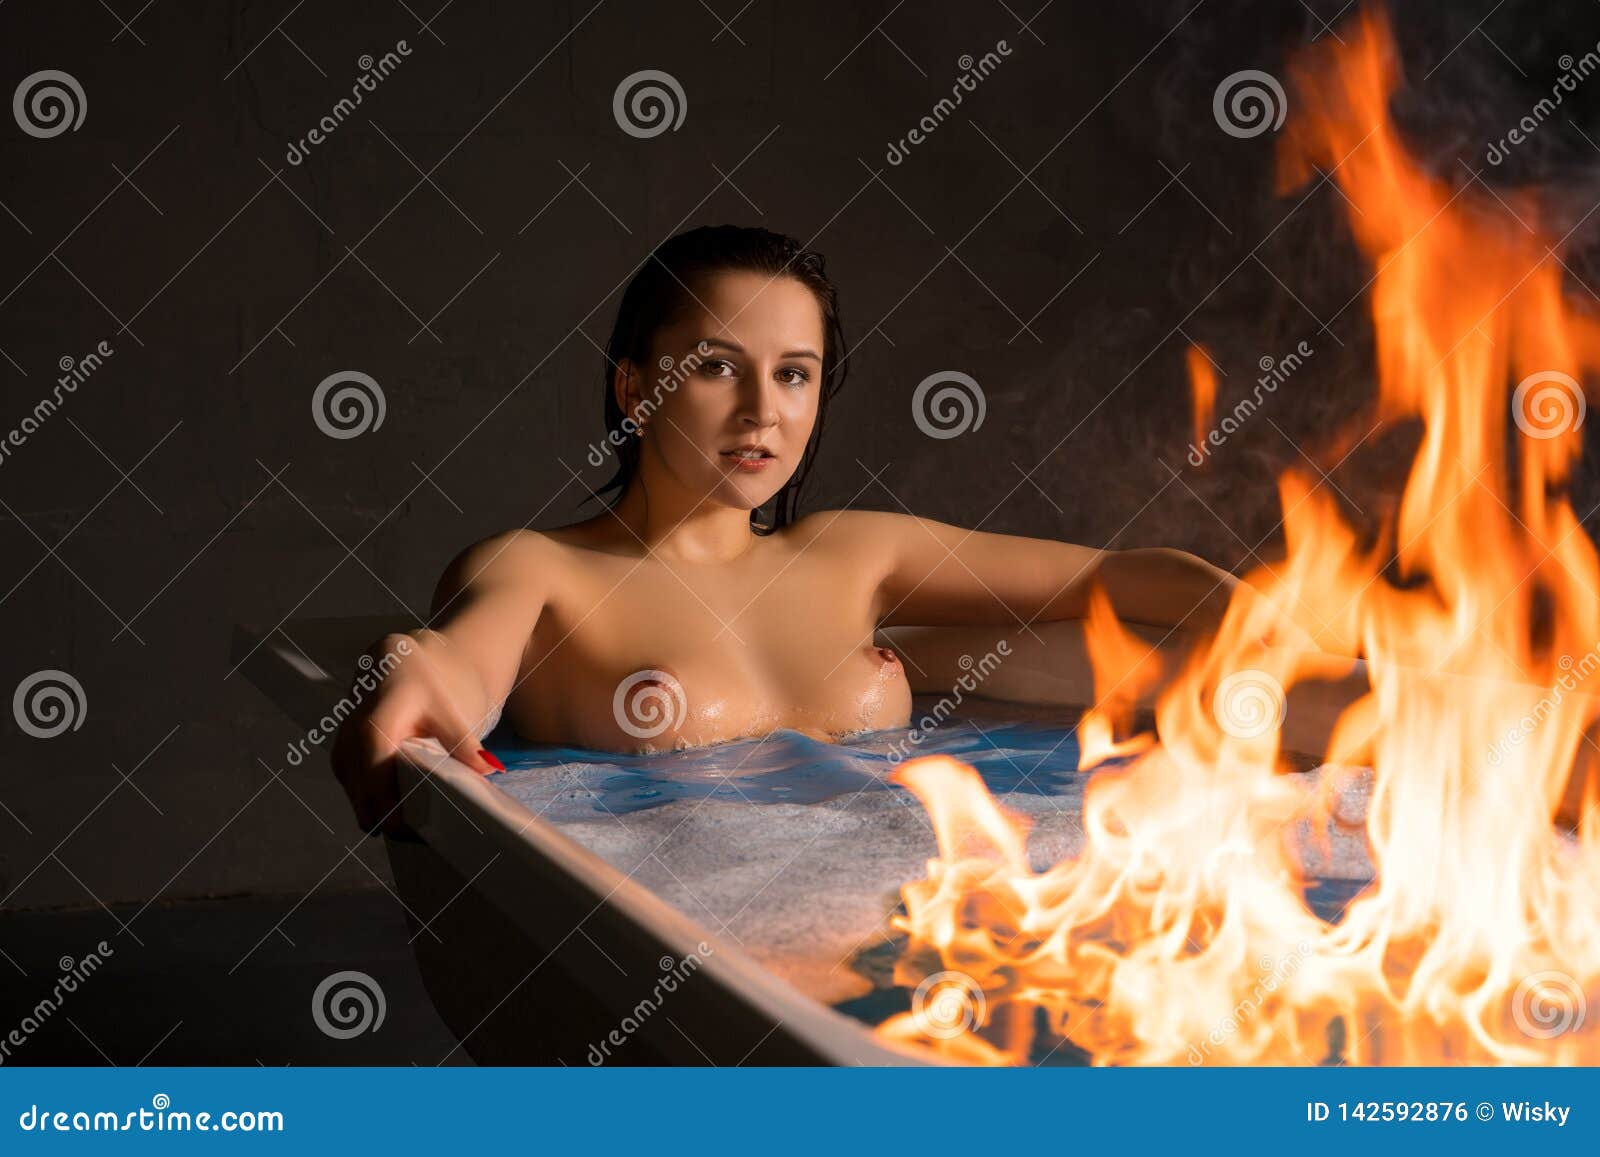 Nude Girl By Fireplace Nerd Girl Tits